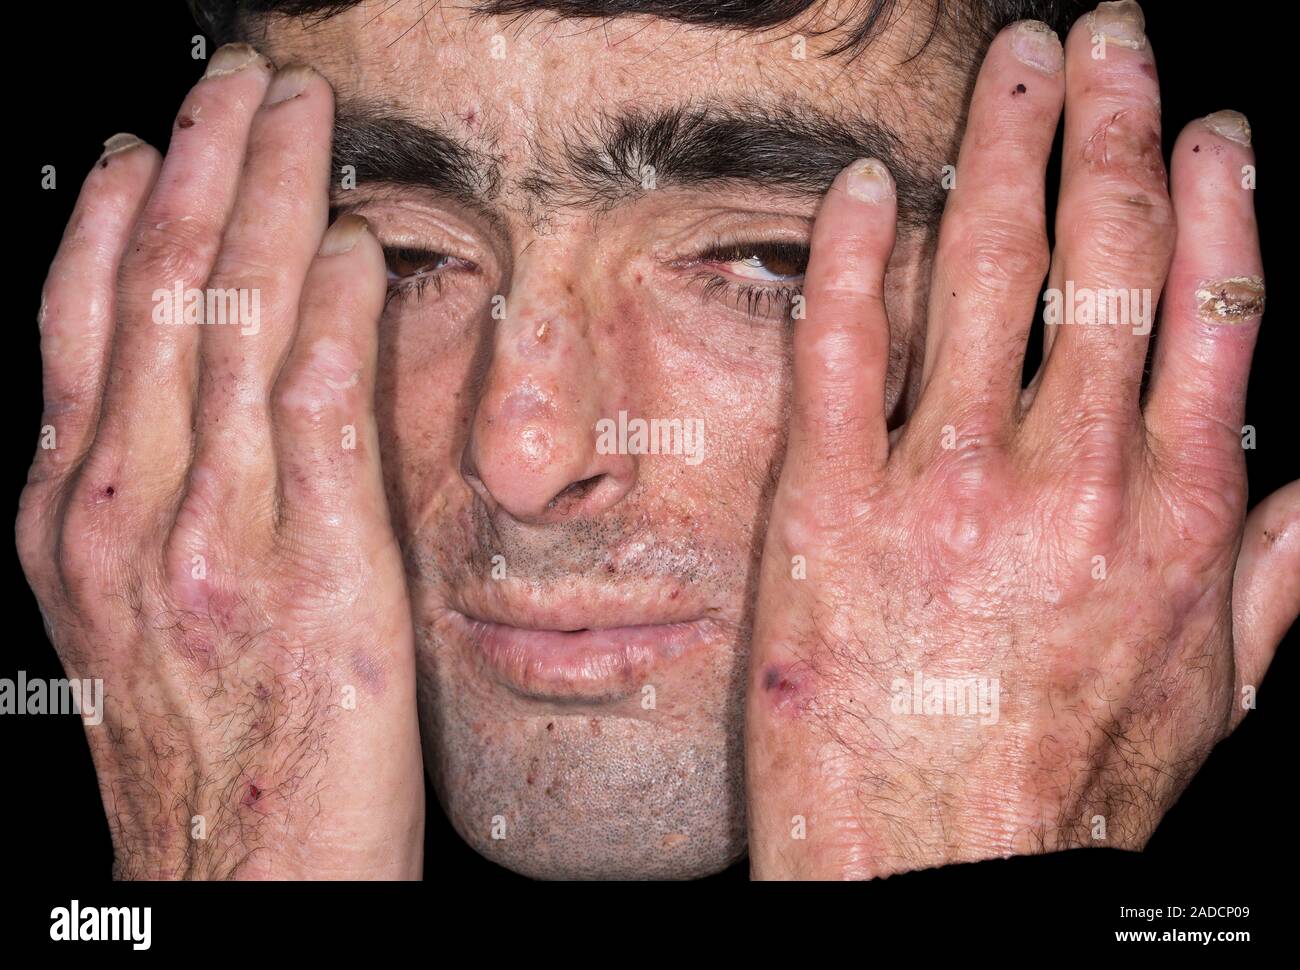 Hands and face of a male patient with porphyria cutanea tarda (PCT), a type of cutaneous porphyria. Porphyria is the name given to a group of disorder Stock Photo